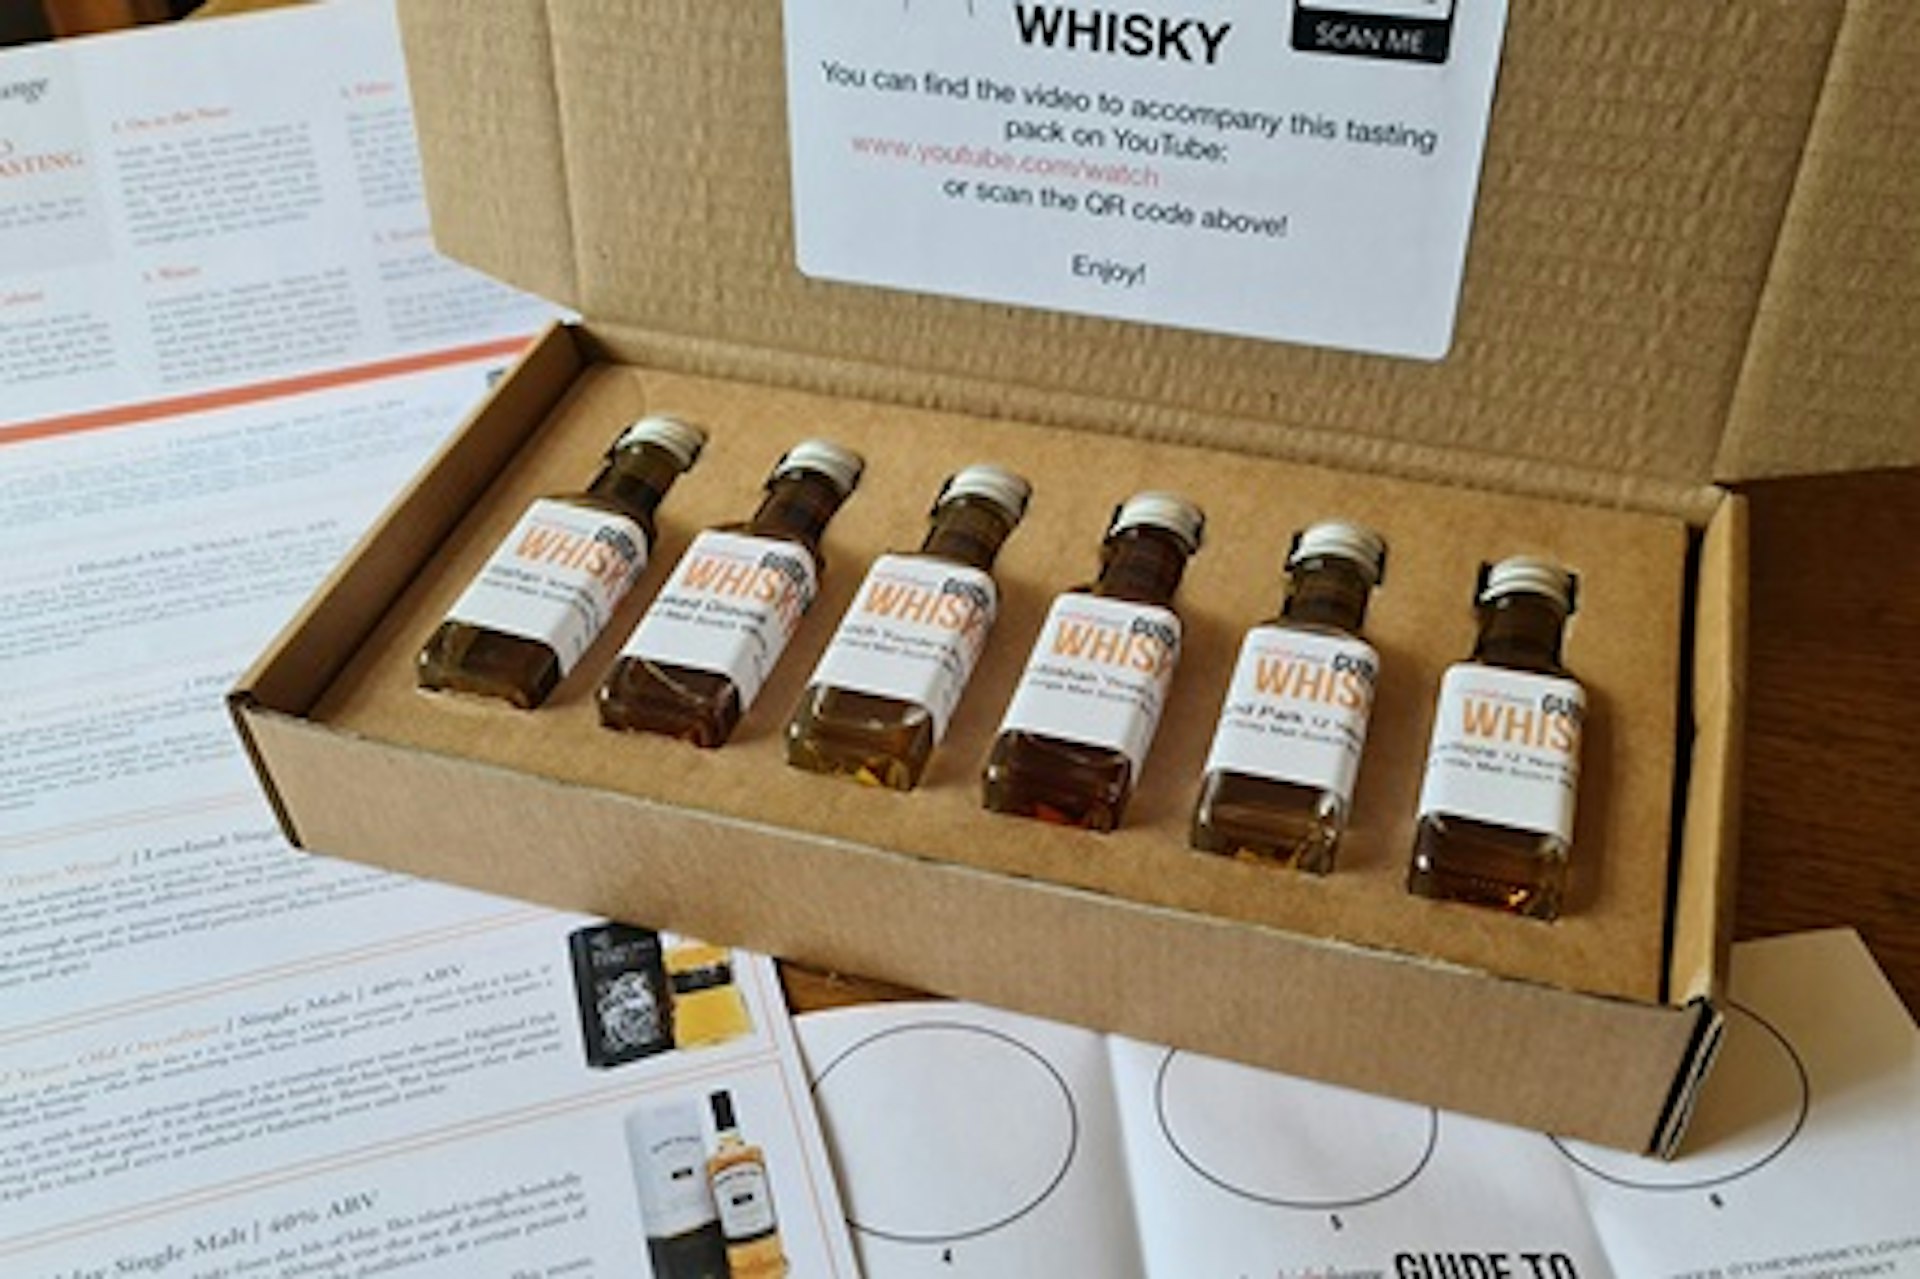 Guide to Whisky at Home with an Online Tutorial and Tastings